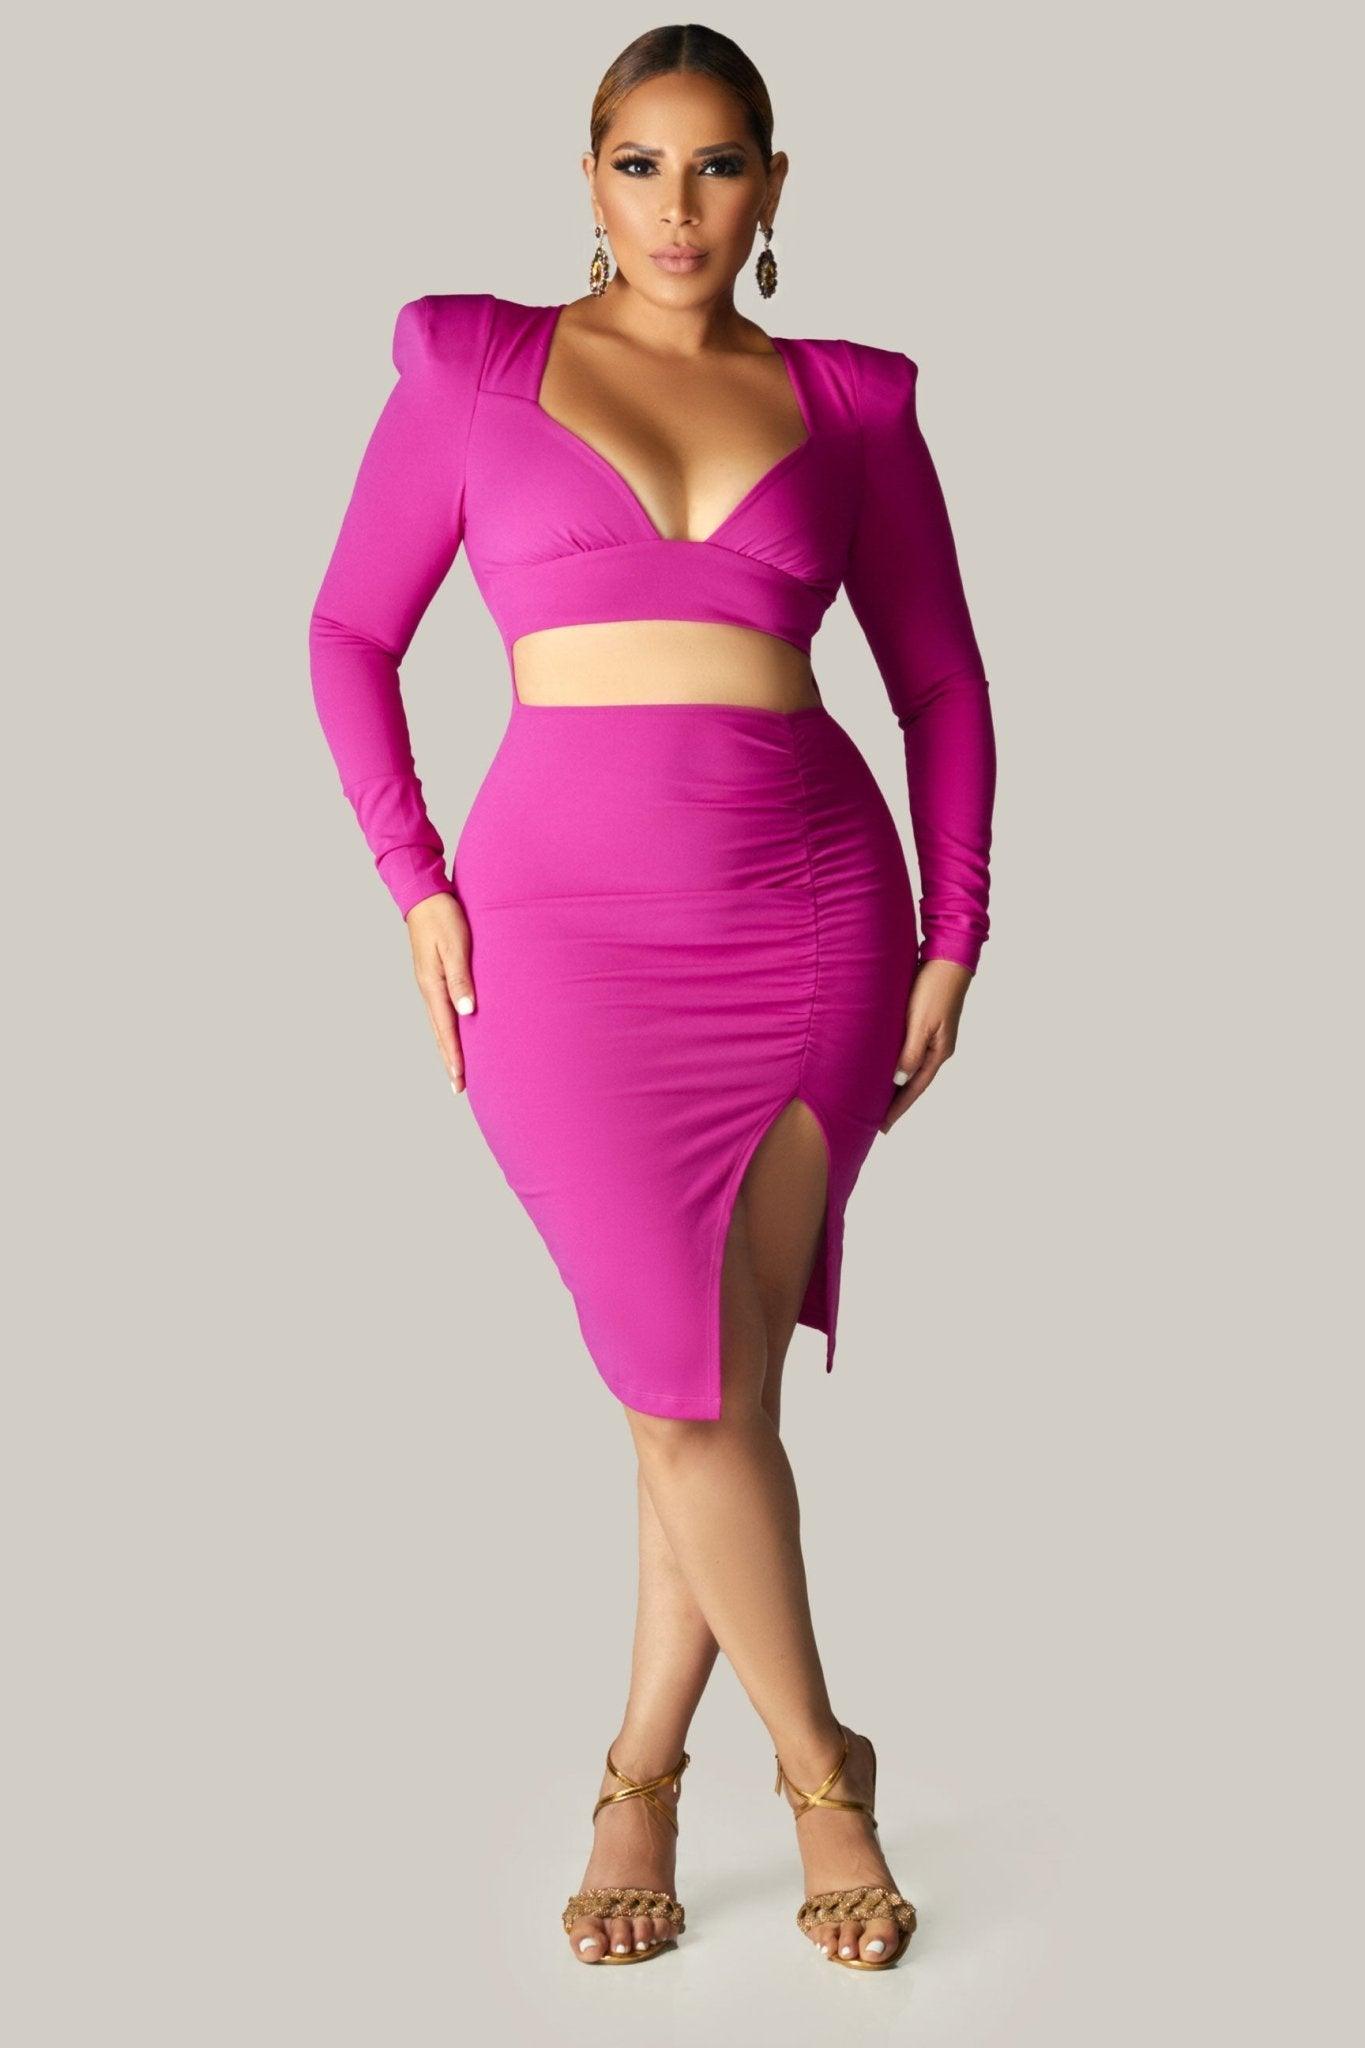 Copy of One Hot Woman Dress - MY SEXY STYLES